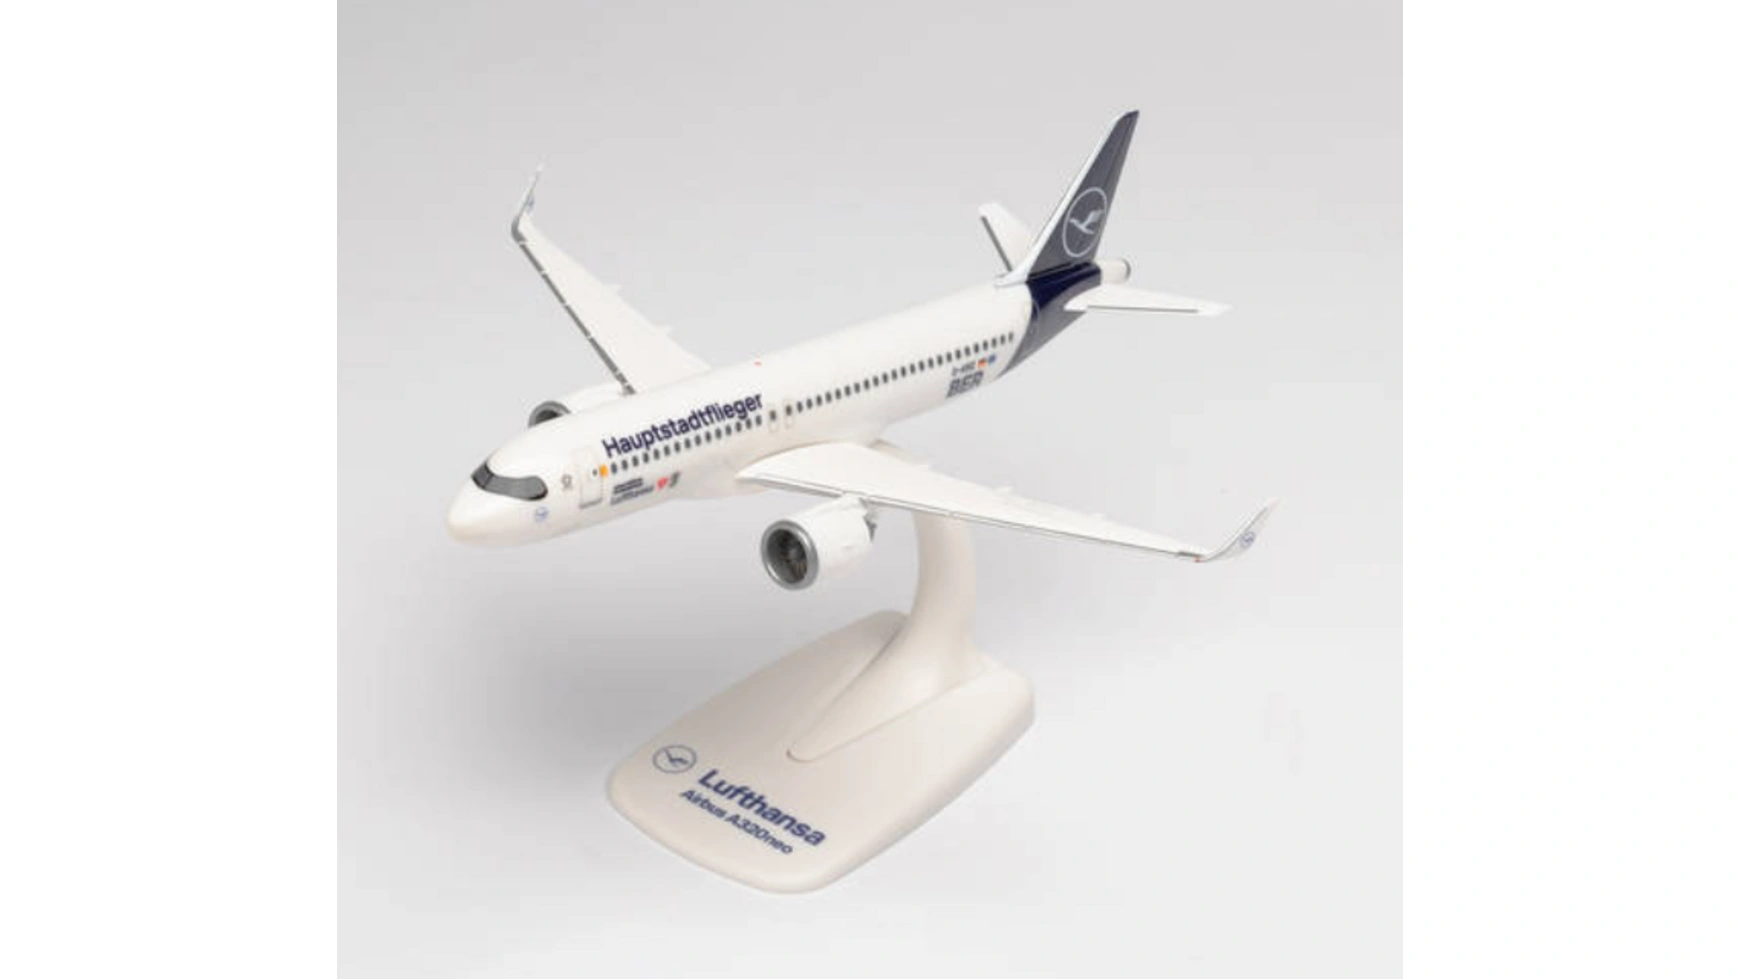 Snap-fit: lufthansa airbus a320neo capital airlines d-ainz Herpa